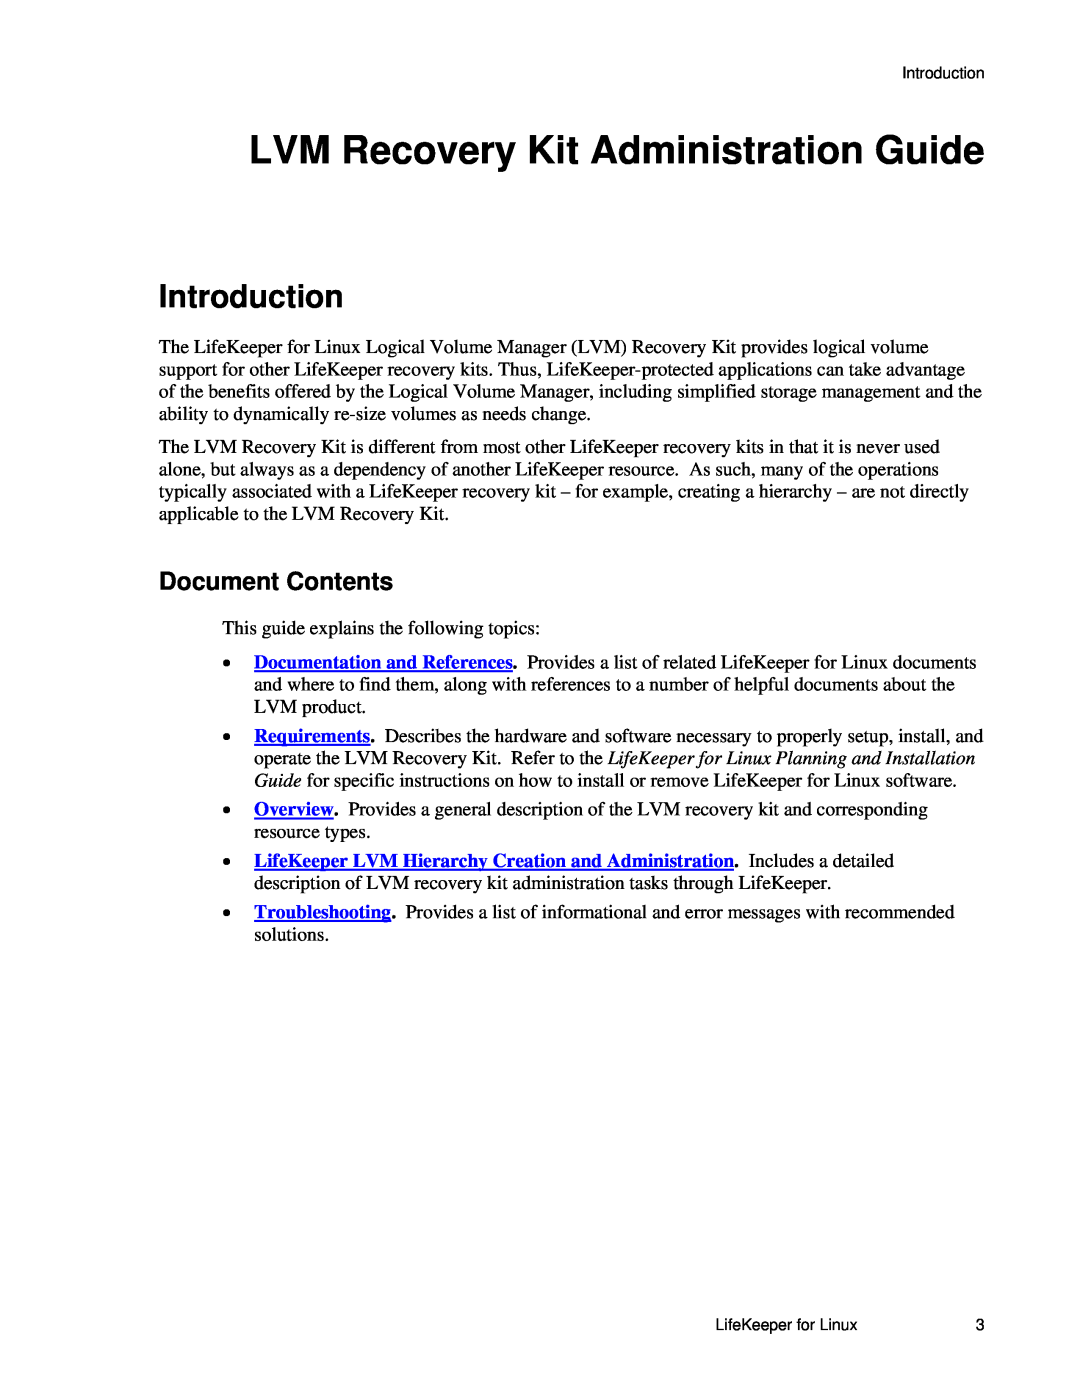 SteelEye 4.5.0 manual Introduction, Document Contents, LVM Recovery Kit Administration Guide 